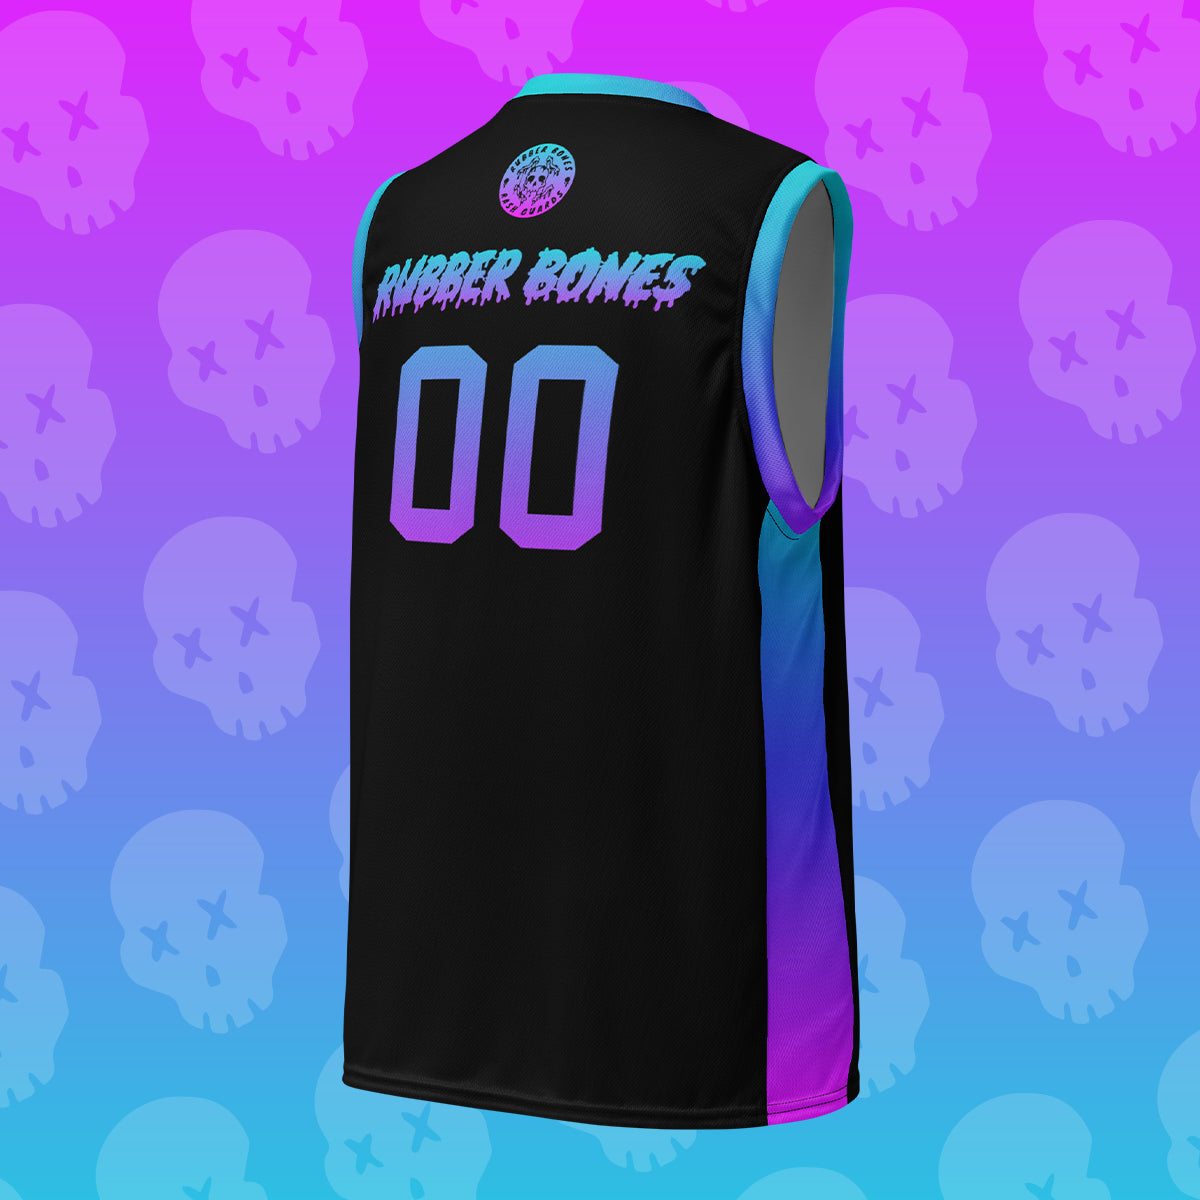 Cotton Candy Recycled unisex basketball jersey